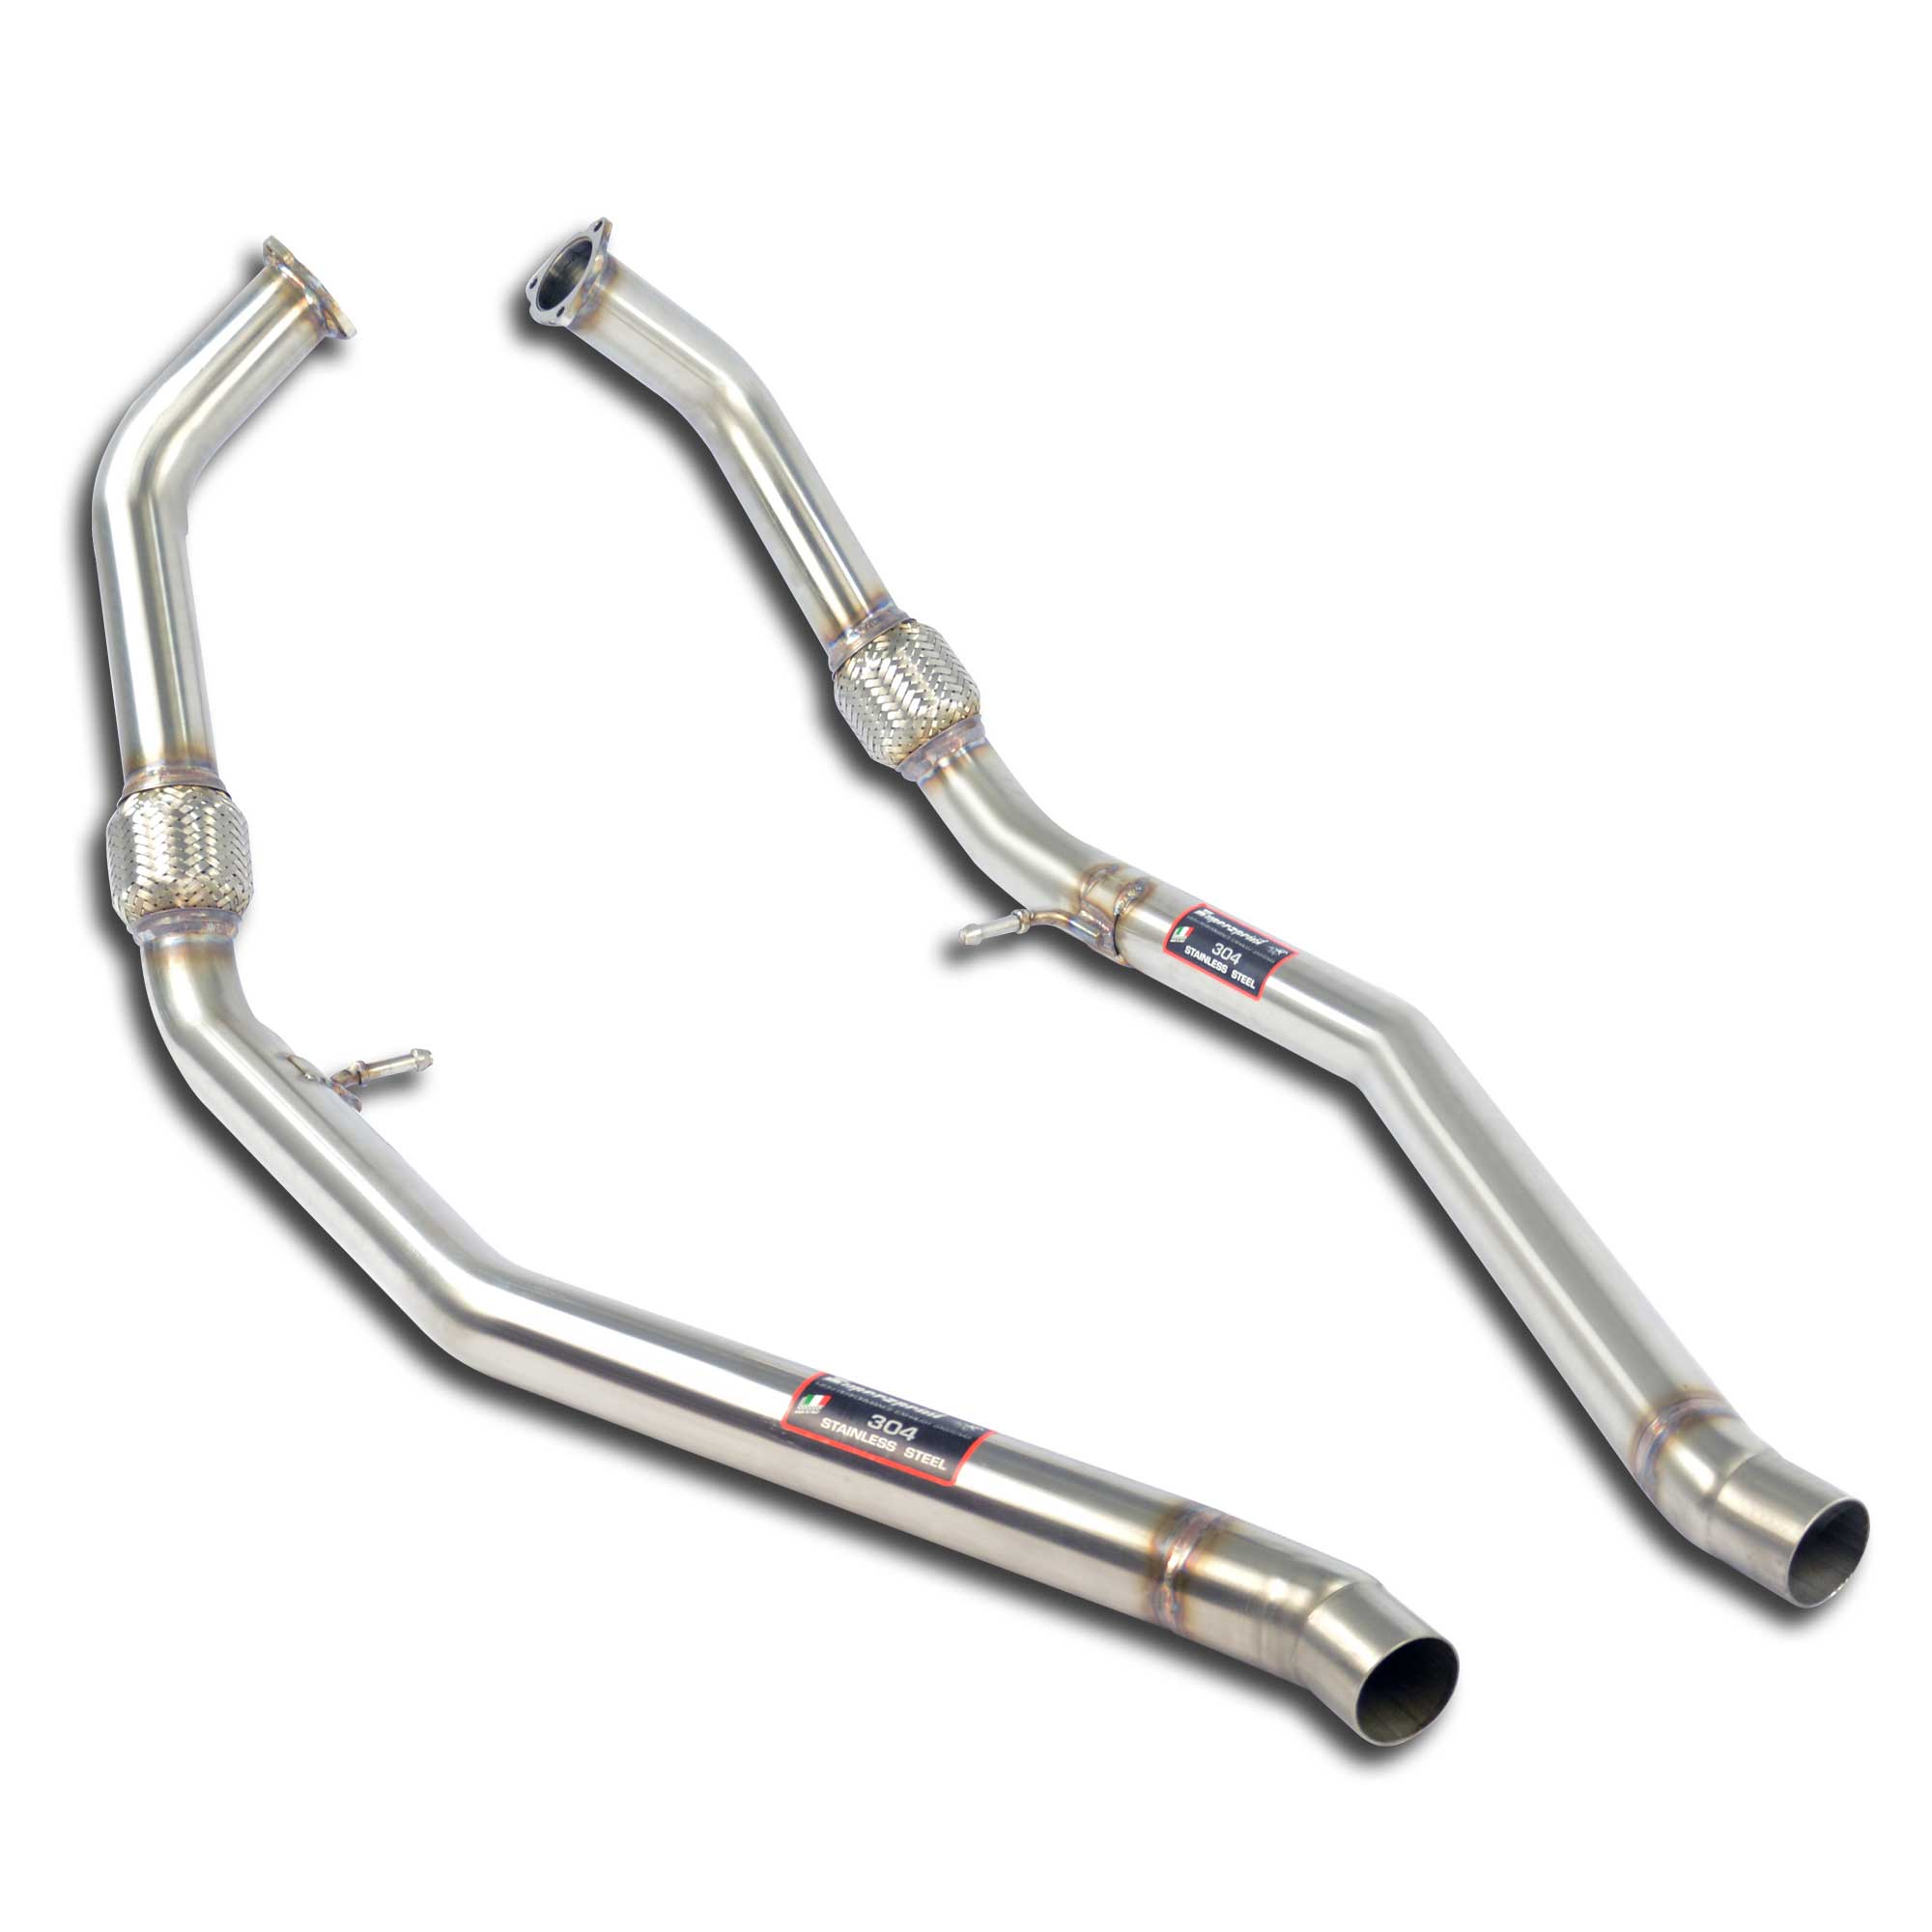 Supersprint Front pipe kit Right - Left (Replaces OEM front exhaust)  AUDI SQ5 QUATTRO 3.0 TFSI V6 (354 Hp) 2017 -